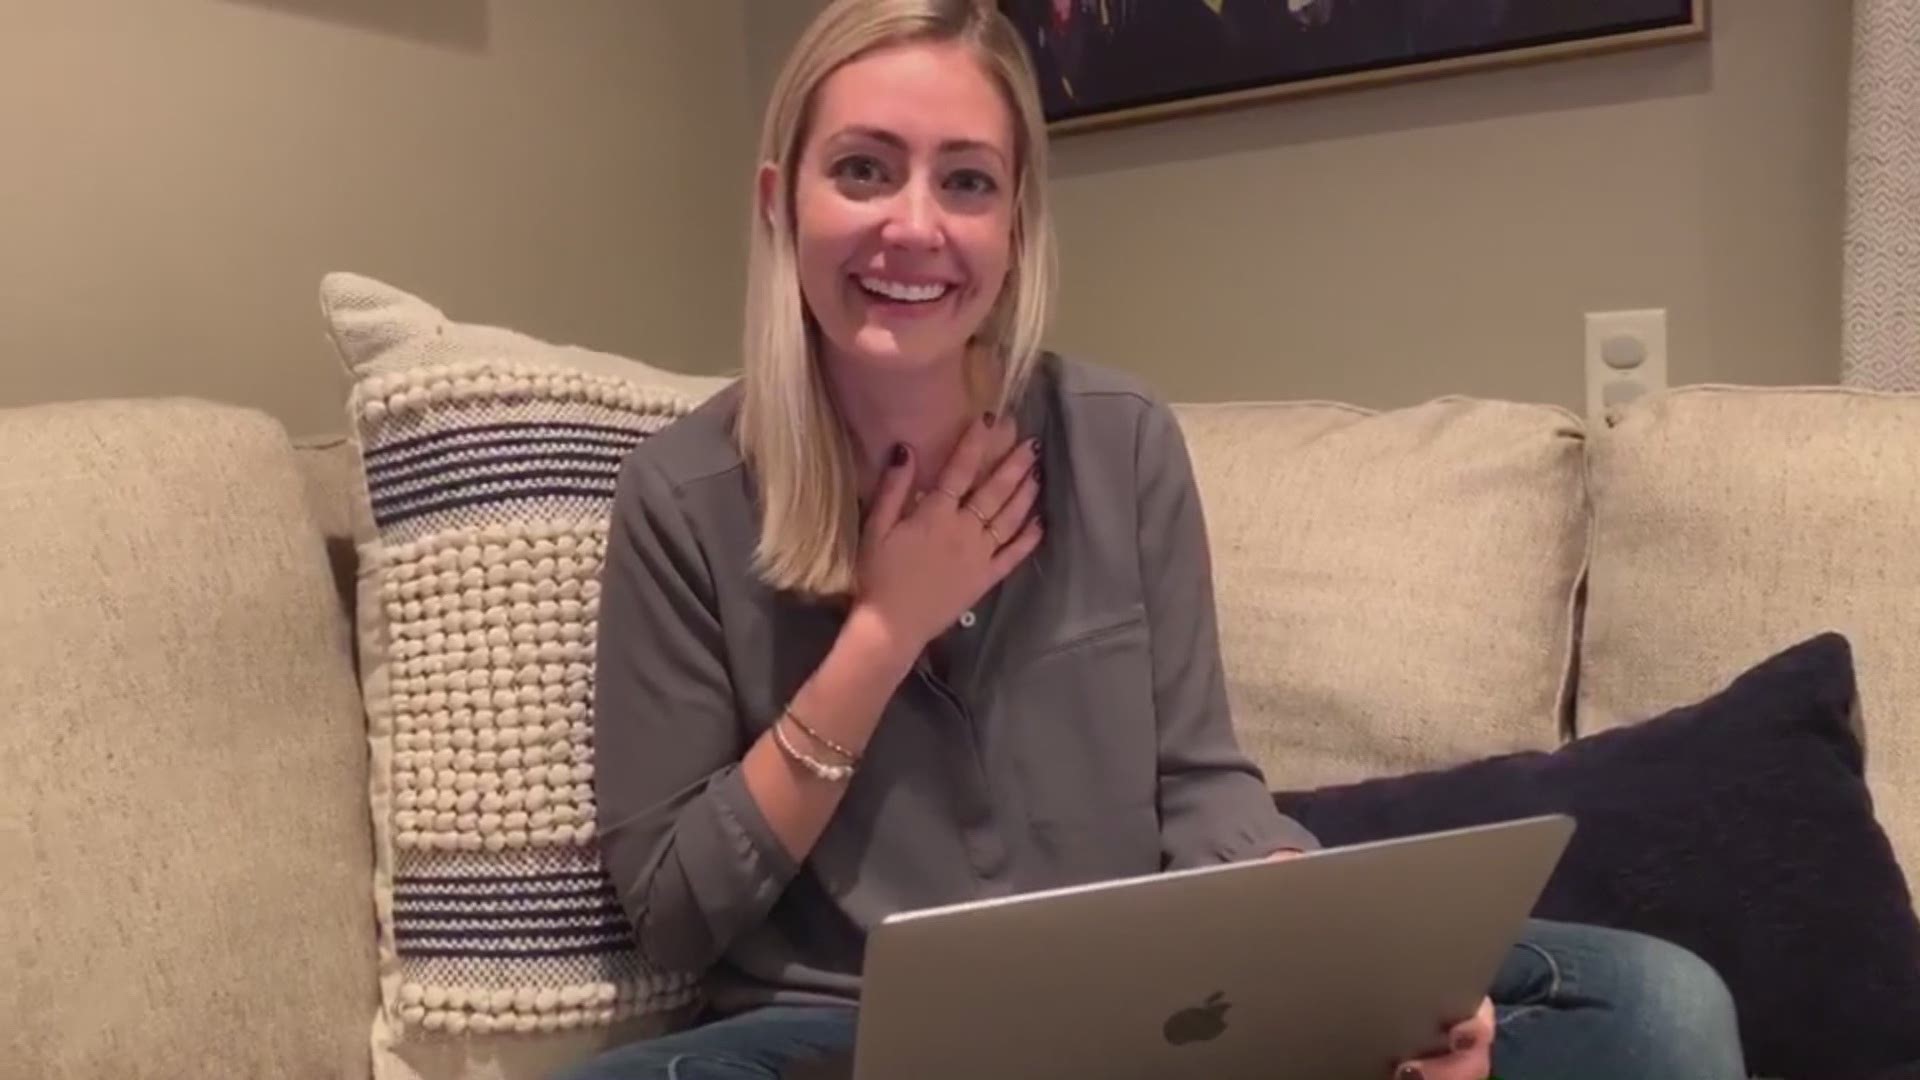 Kat Pestian sets the best example of living and loving life to the fullest. So we decided to surprise her with an emotional message from her husband.